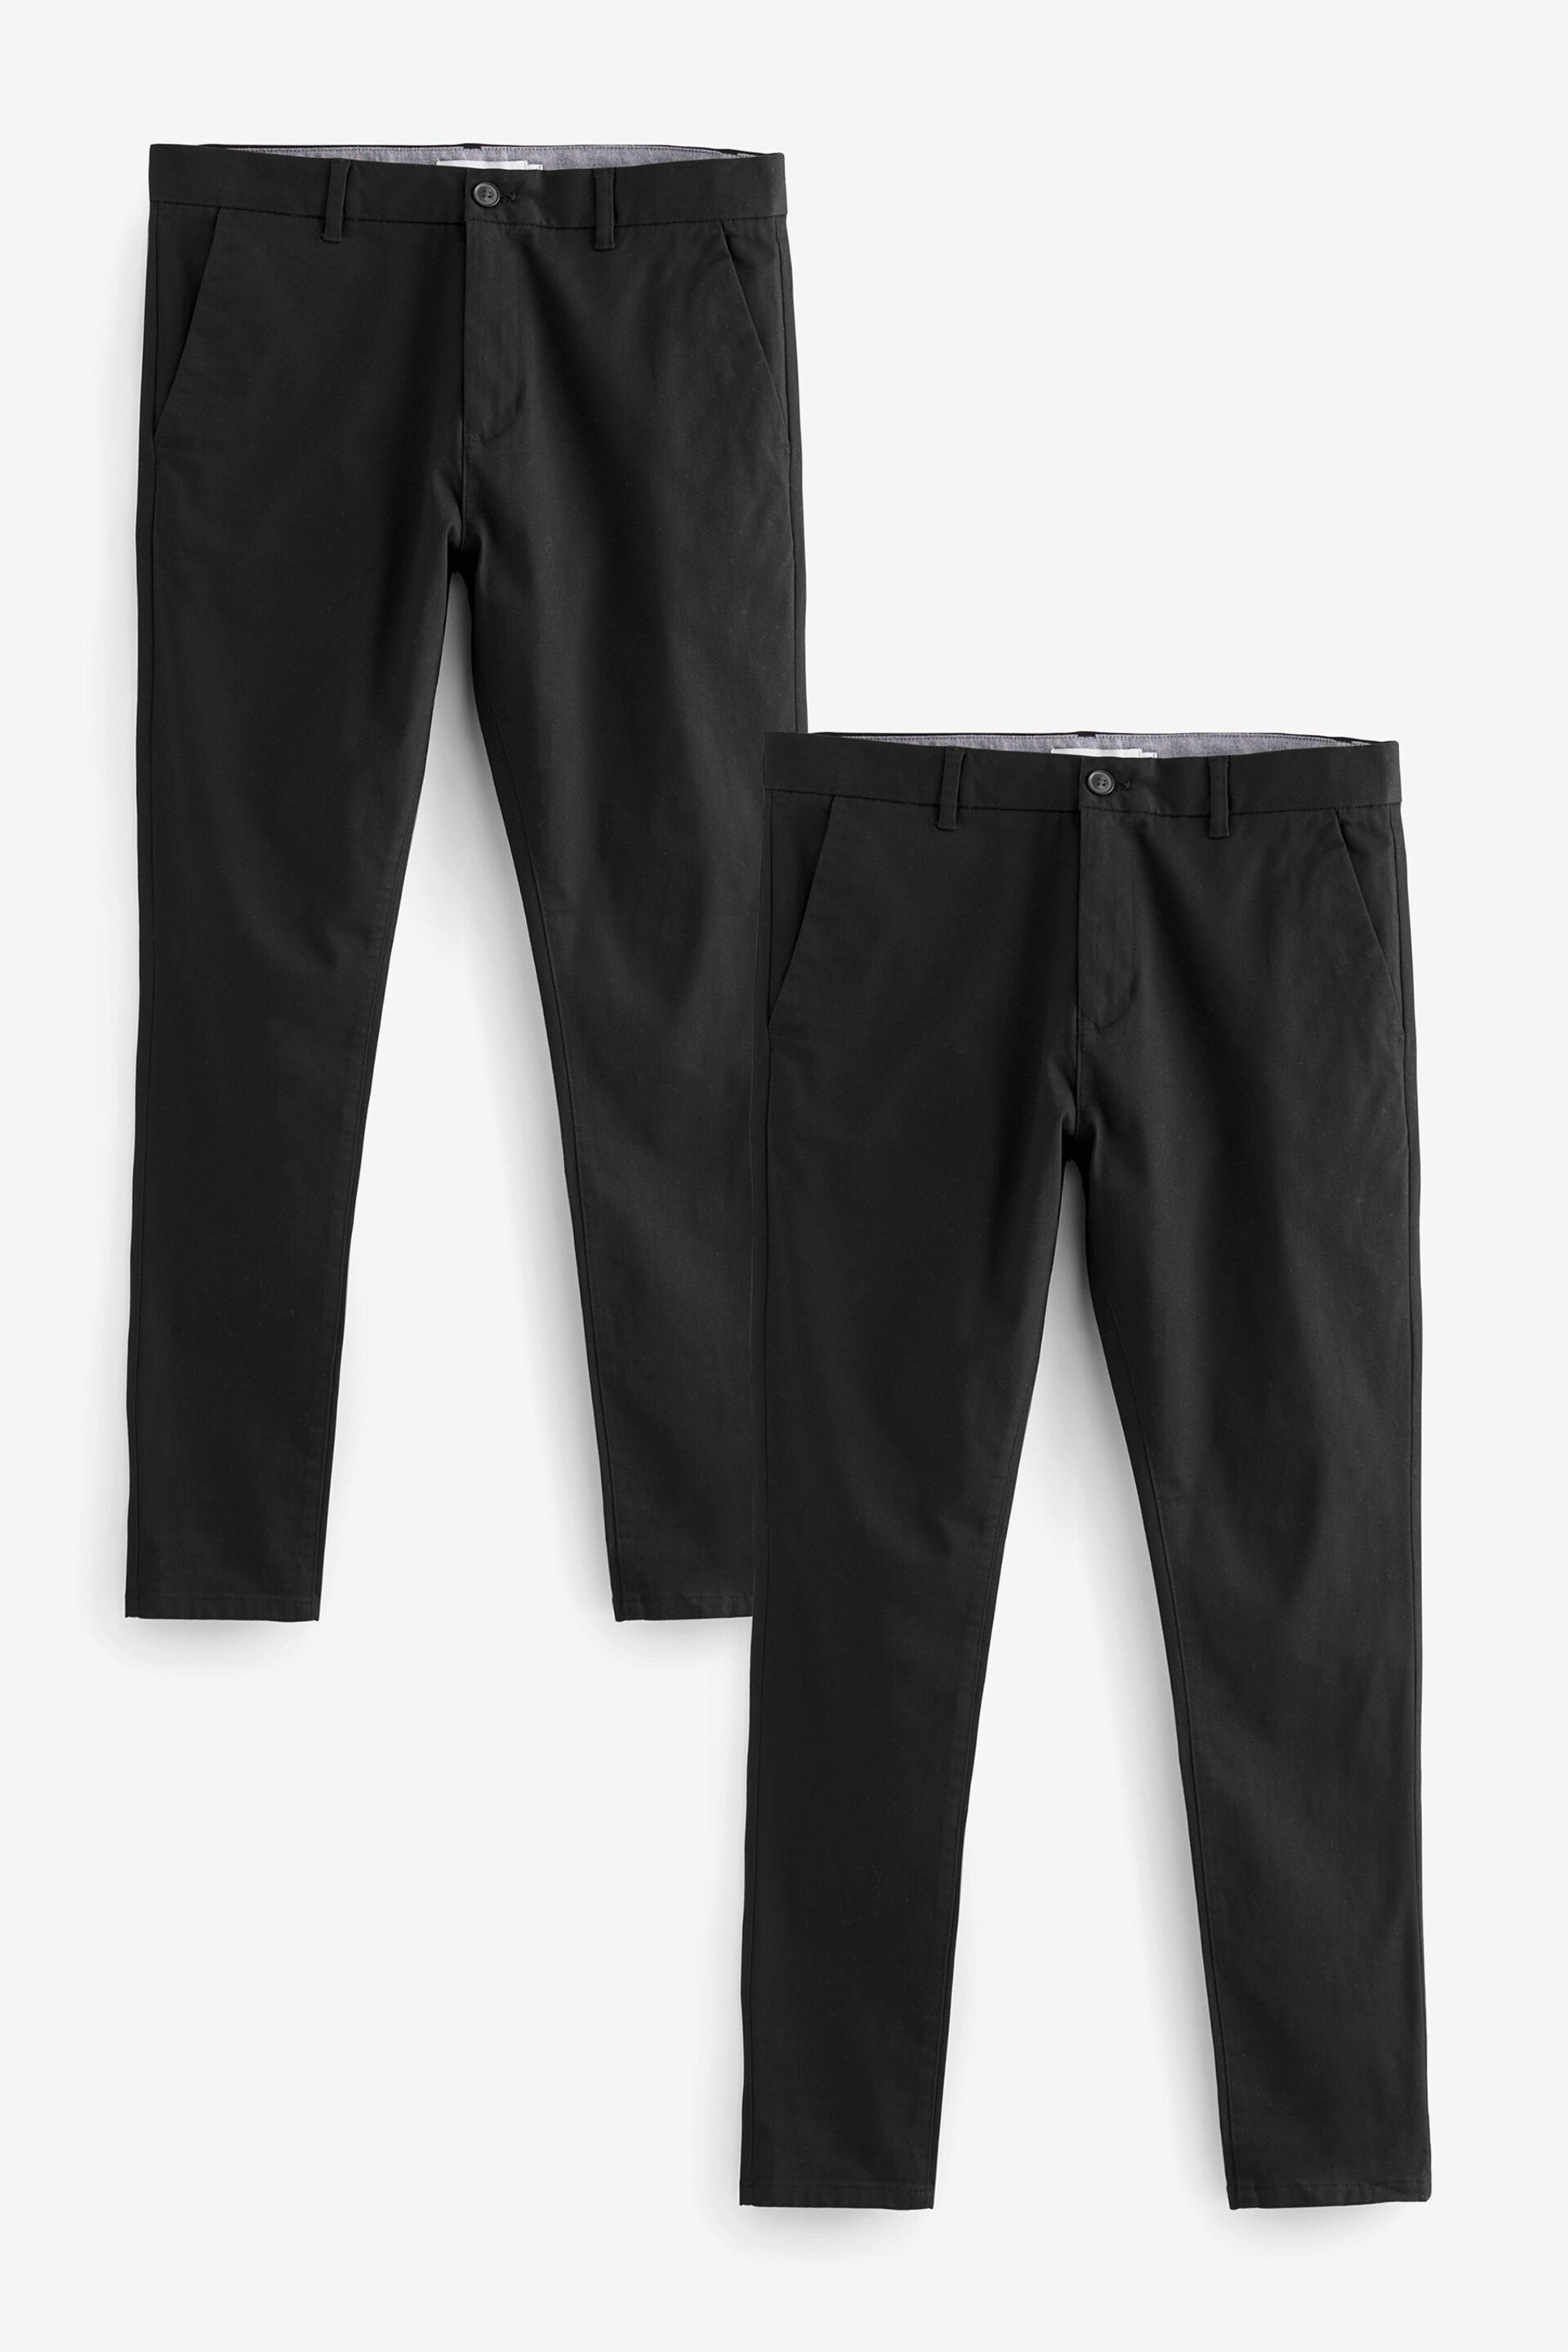 Black Skinny Stretch Chino Trousers 2 Pack - Image 7 of 9